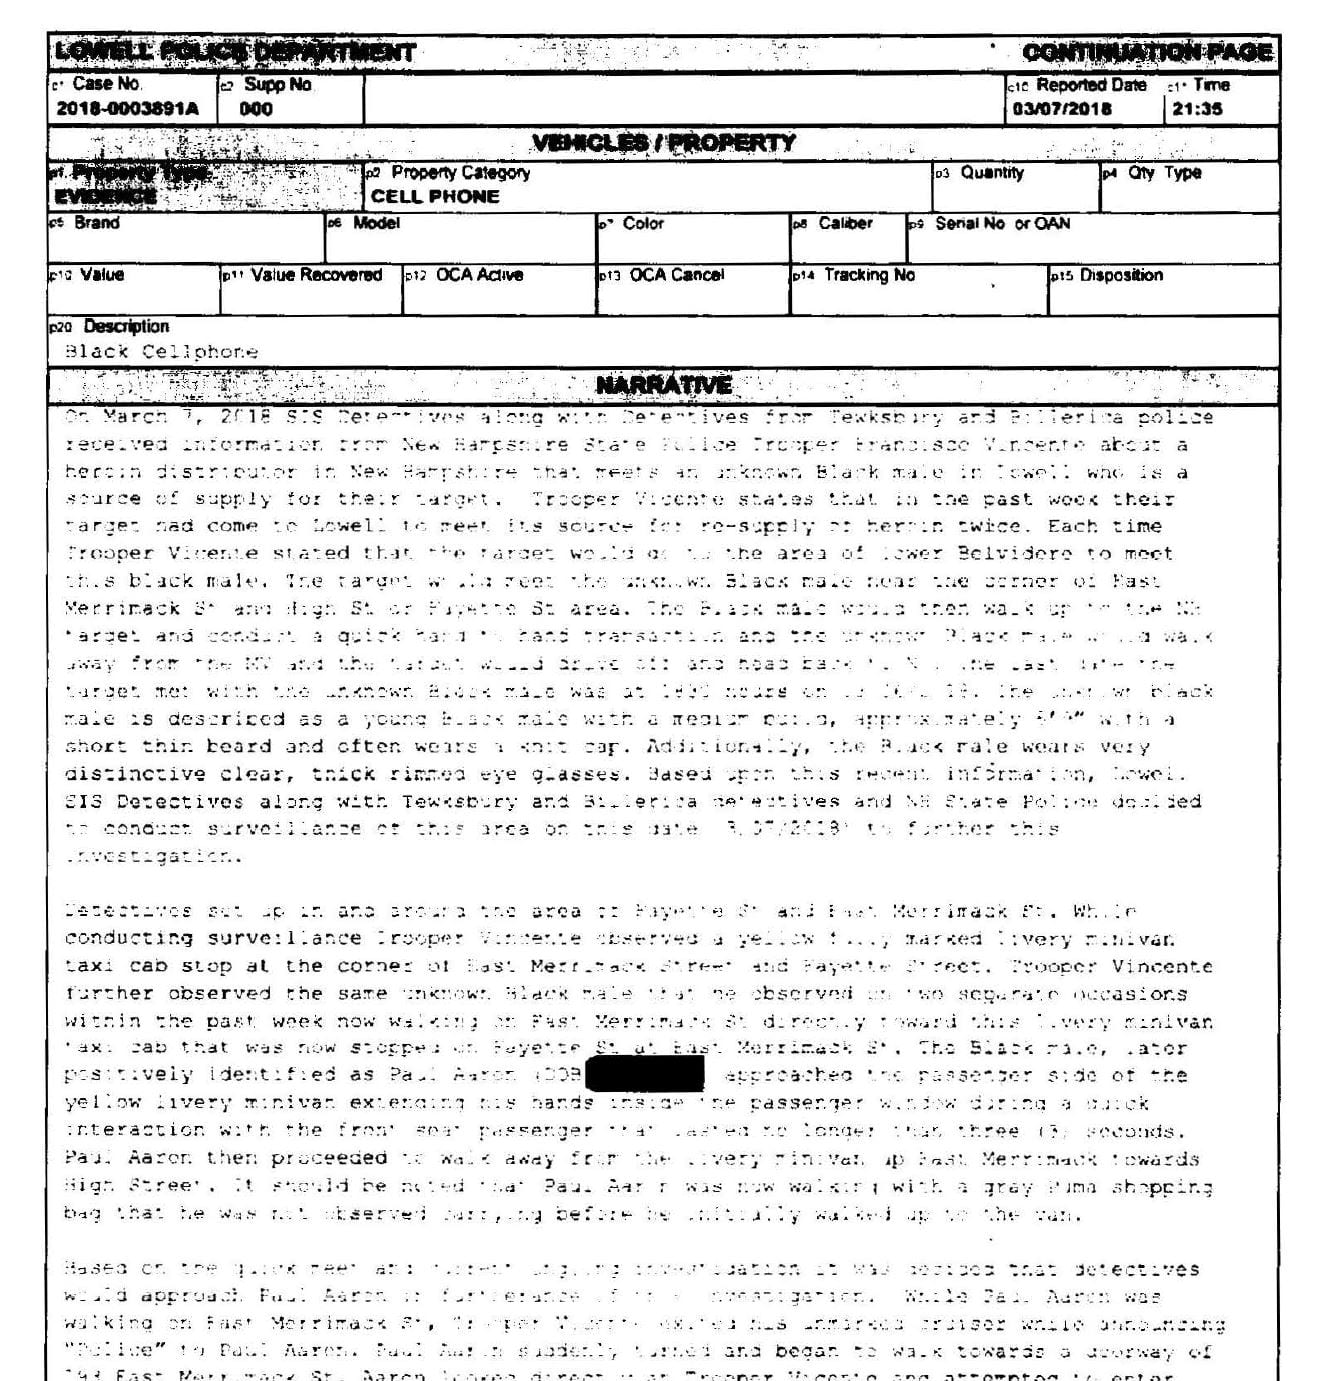 Are Police Logs Public Record - KnowYourPolice.net